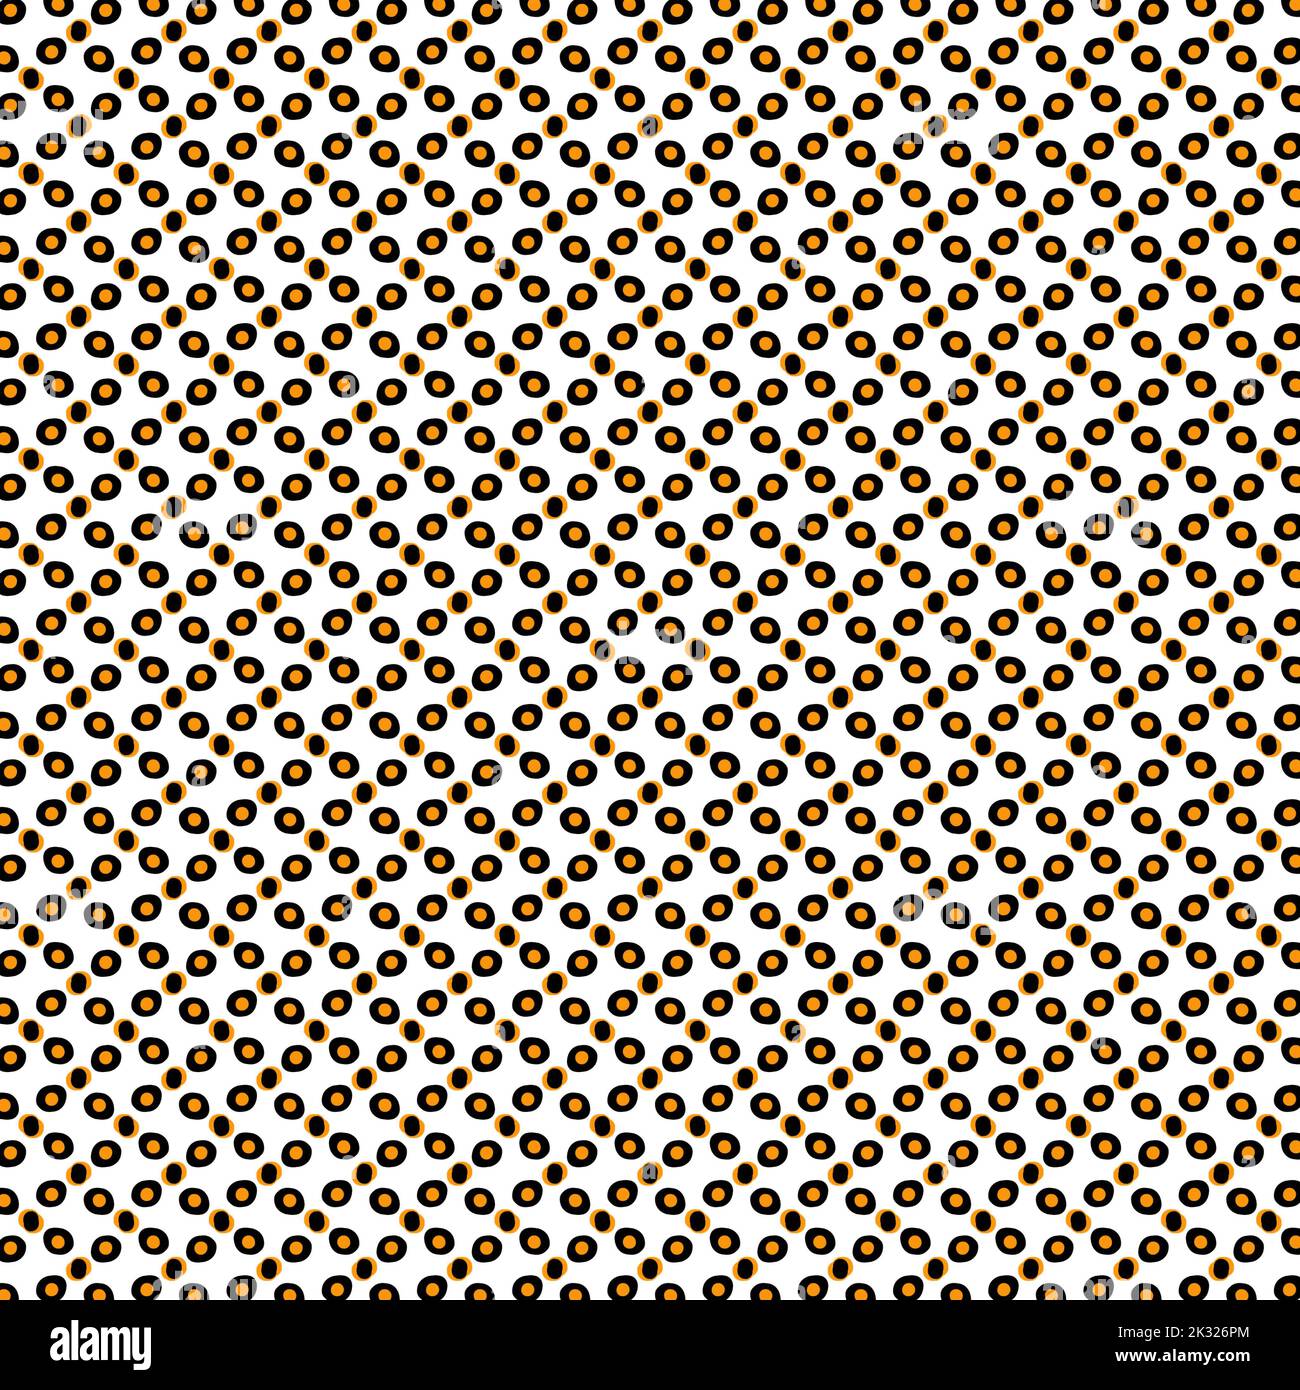 Seamless abstract pattern design with free-hand black dots and orange dots on white background, graphic pattern for textile, wallpaper or paper wrap Stock Photo